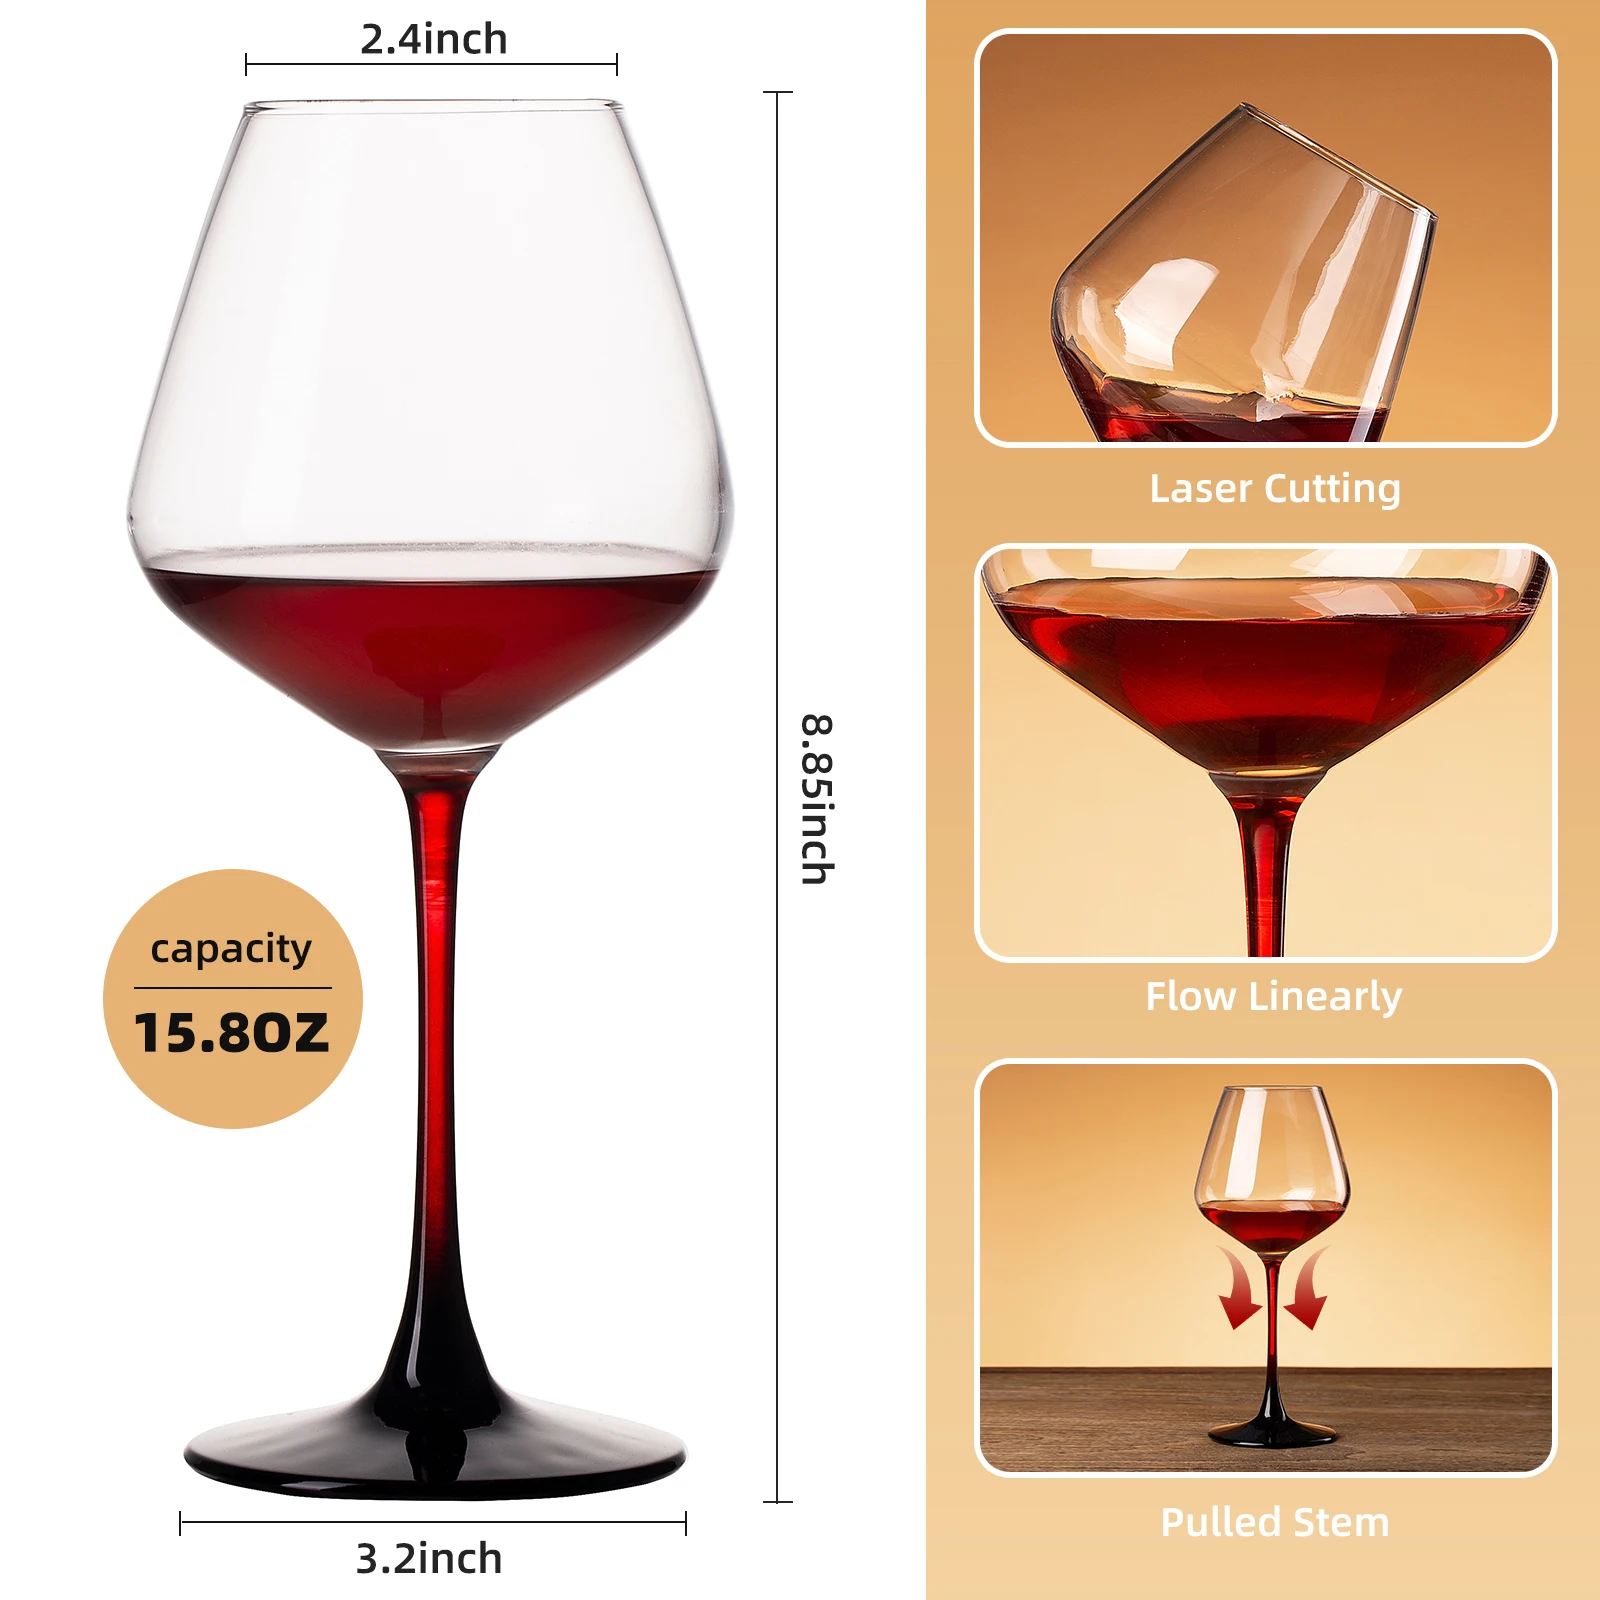 https://ae01.alicdn.com/kf/S2e5145d4d2624047b0c3fbb30f328478Z/Set-of-2-Camping-Wine-Glass-Clear-Long-Stem-Wine-Glasses-Crystal-Red-Wine-Glasses-White.jpg